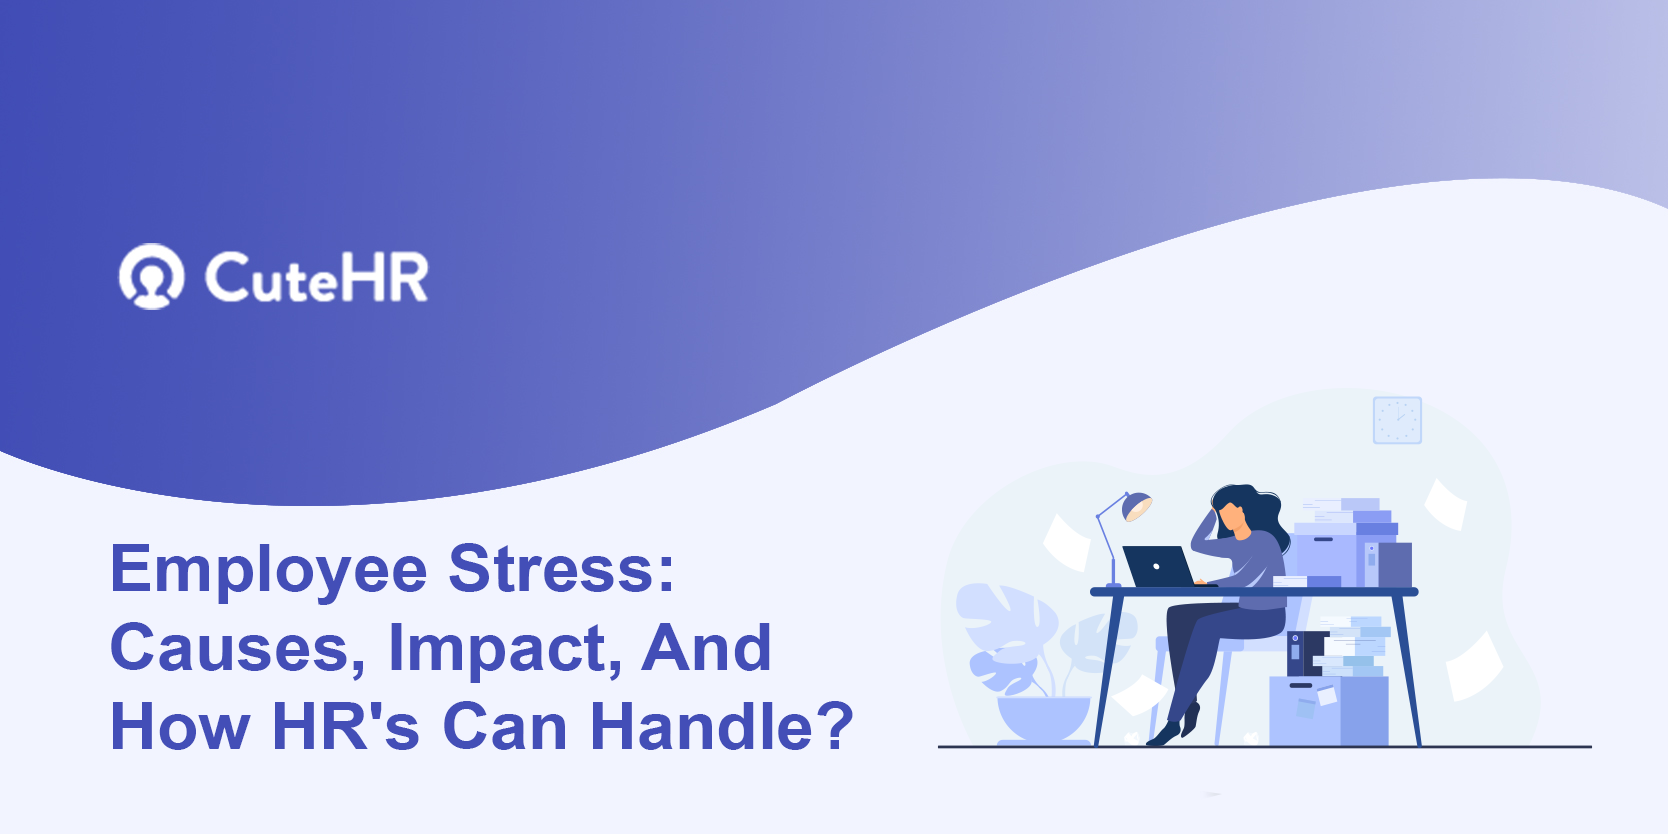 Employee Stress: Causes, Impact, And How HR's Can Handle?